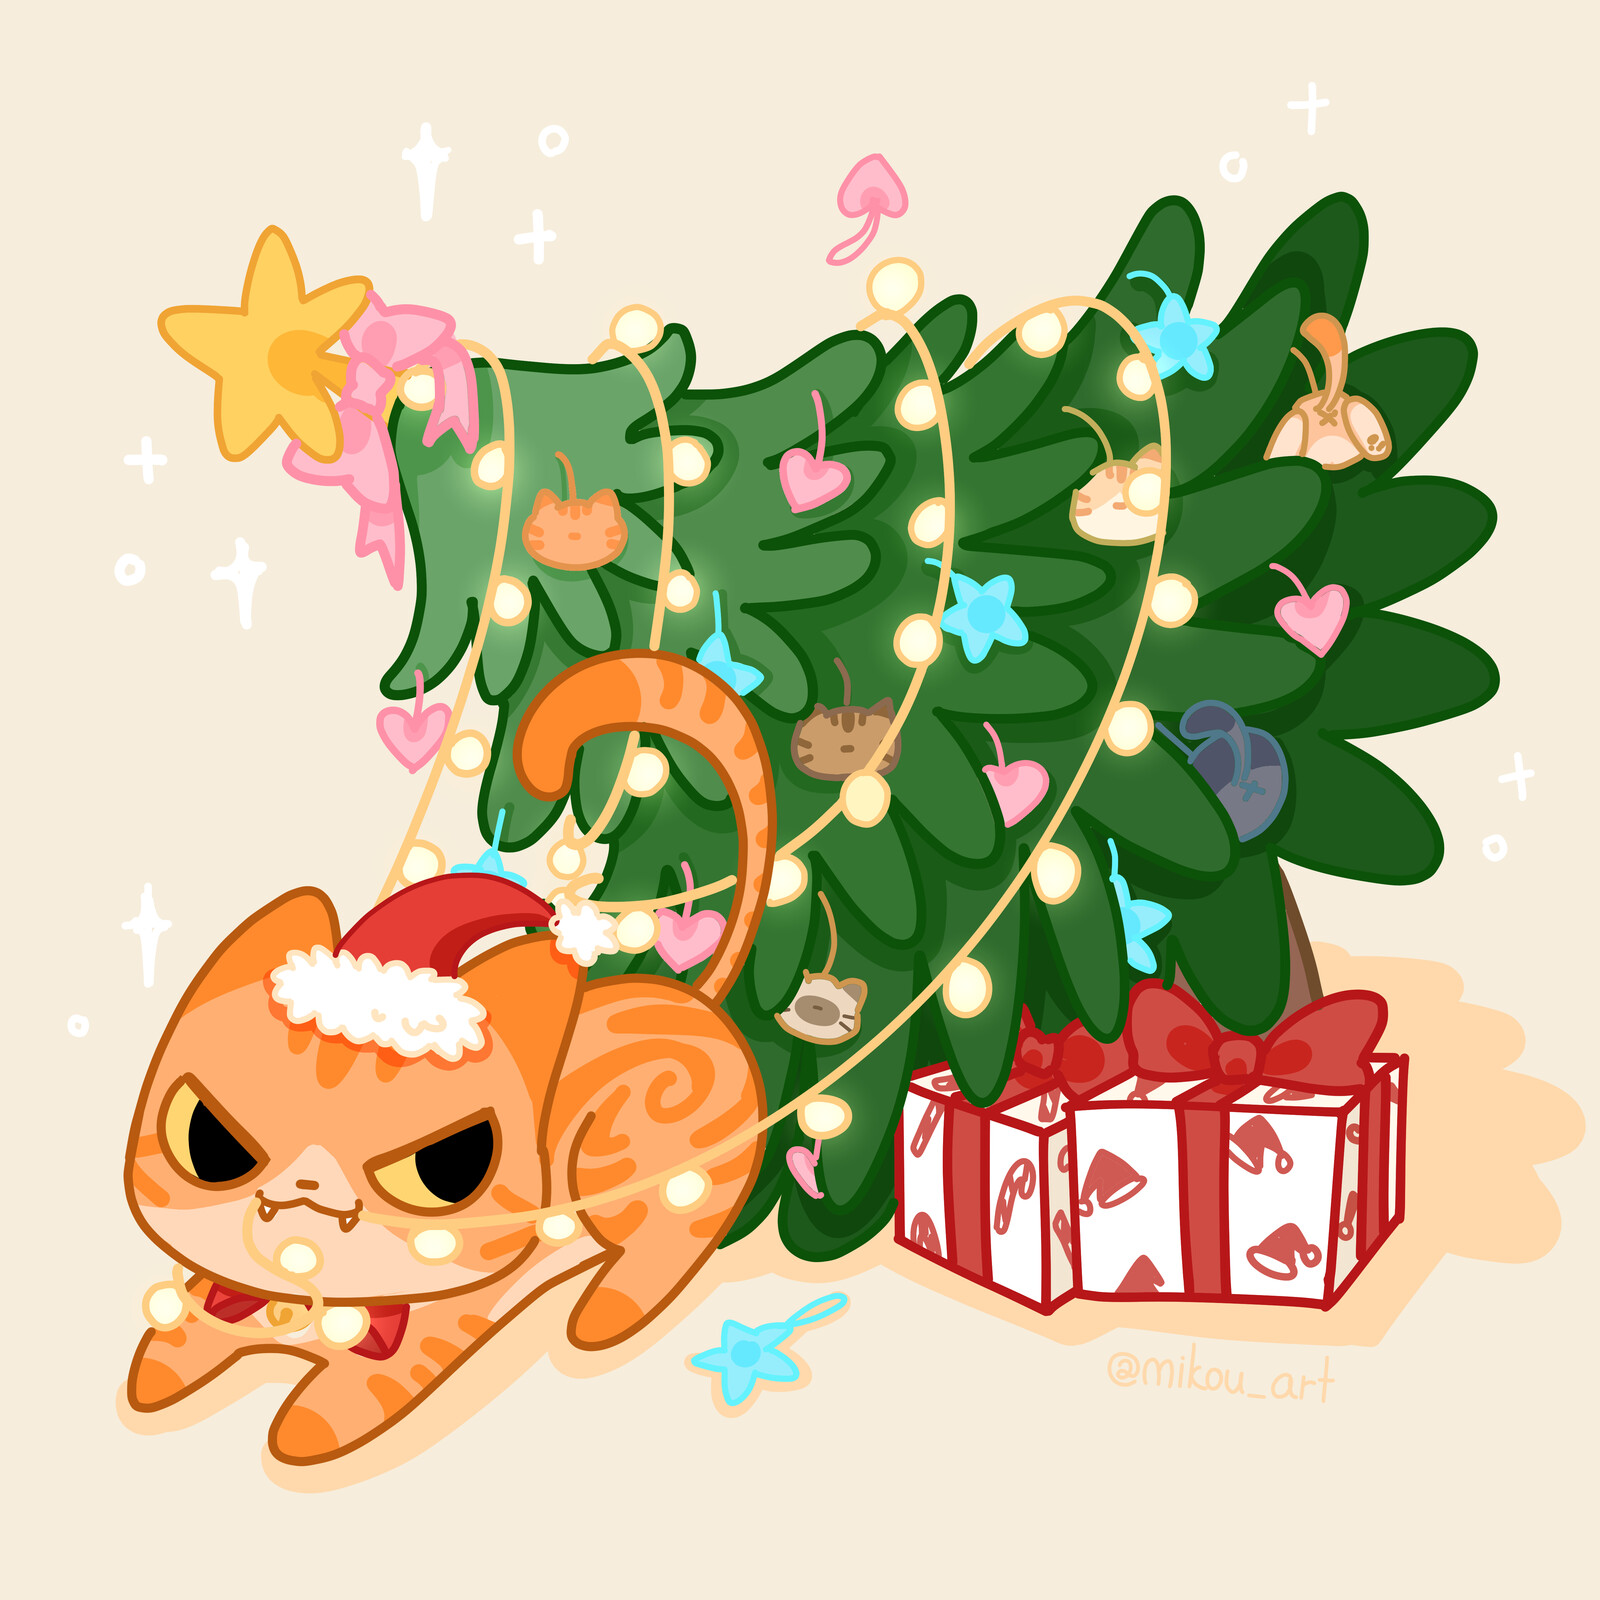 Cat and Christmas tree